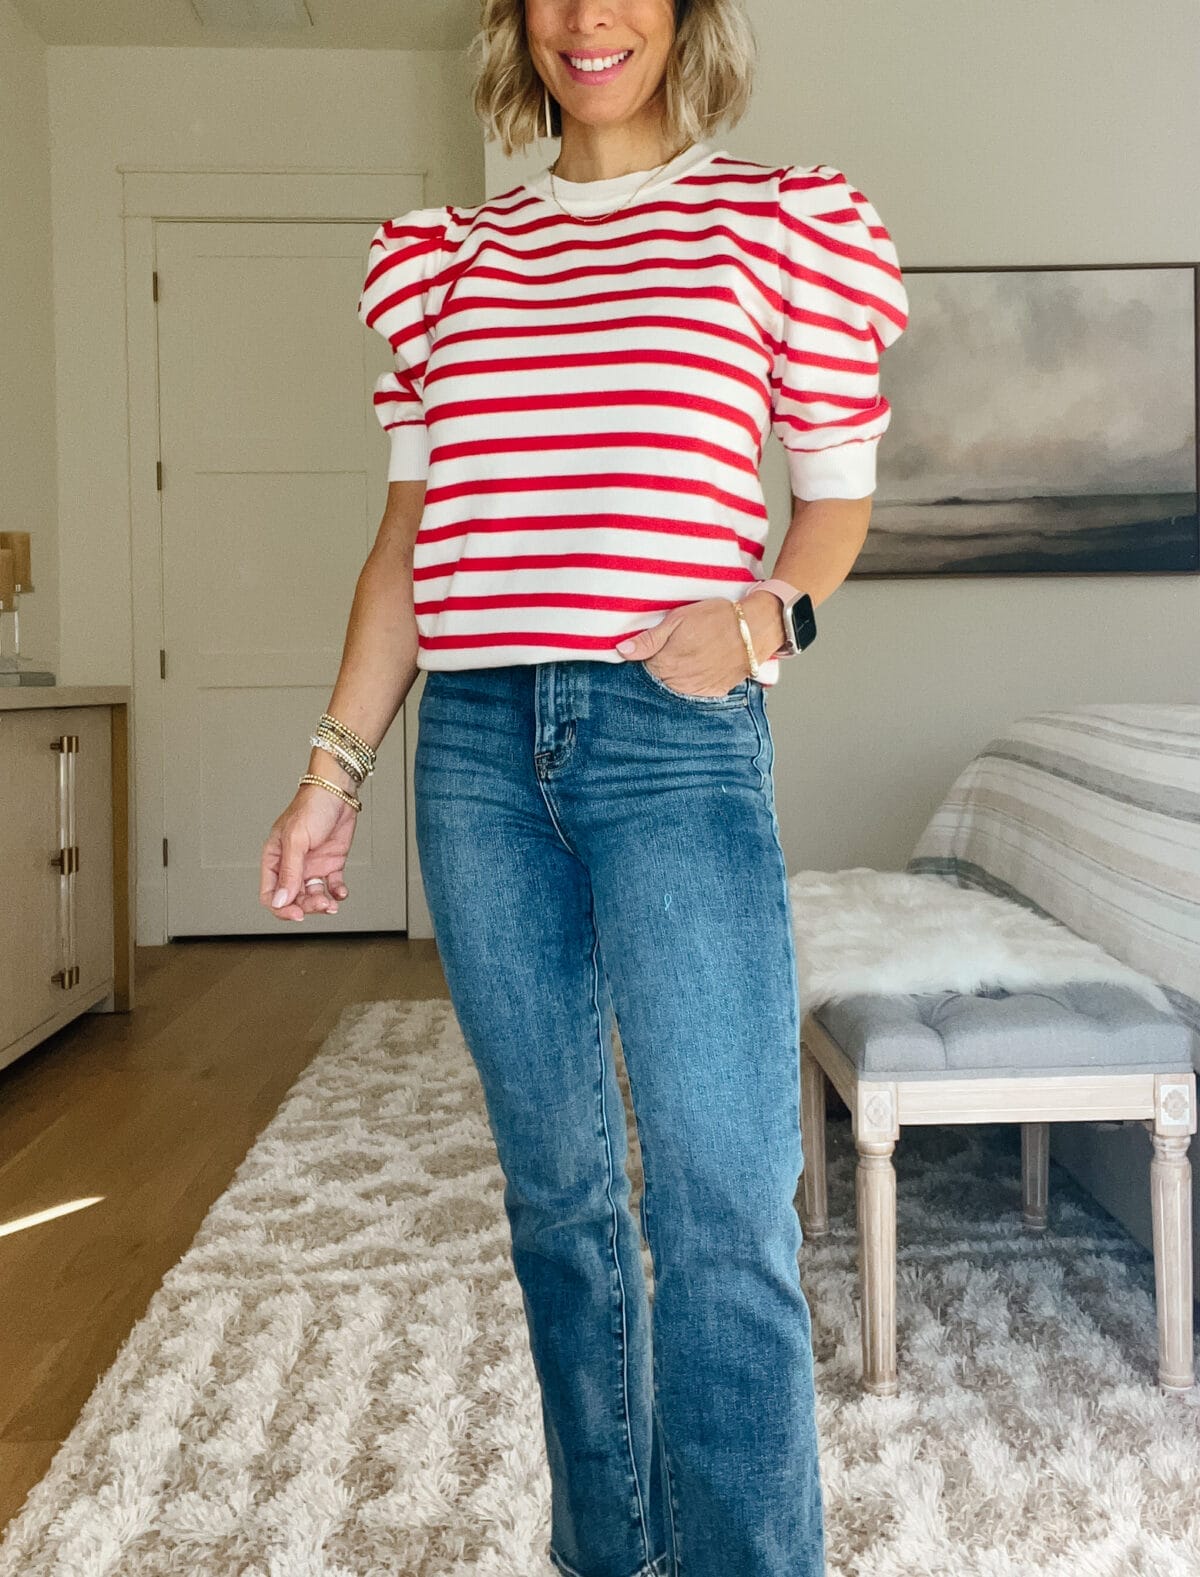 Red White Striped Top, Jeans, Heels